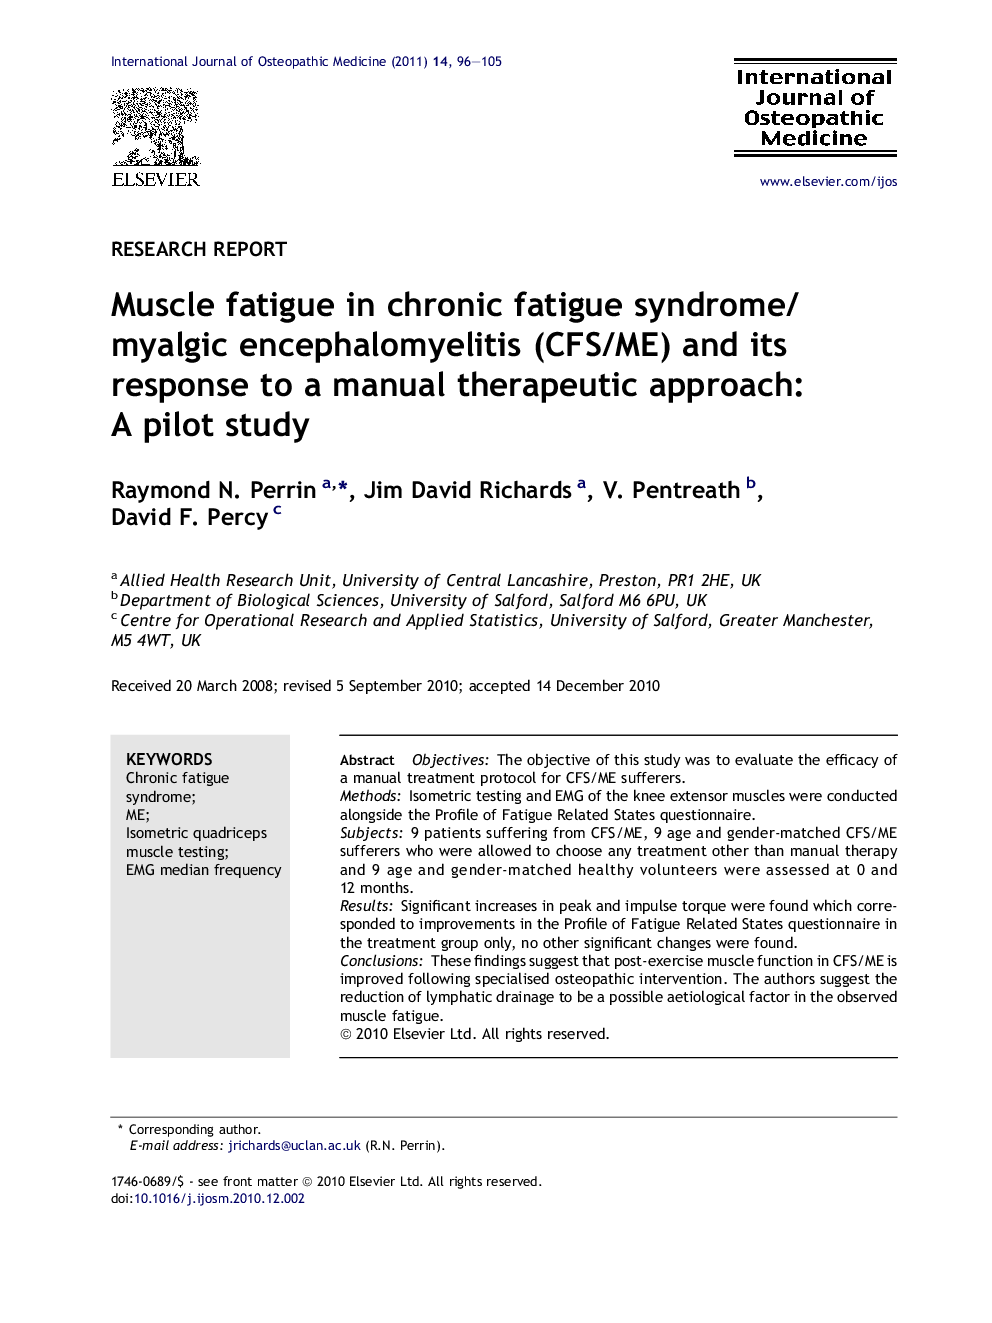 Muscle fatigue in chronic fatigue syndrome/myalgic encephalomyelitis (CFS/ME) and its response to a manual therapeutic approach: A pilot study